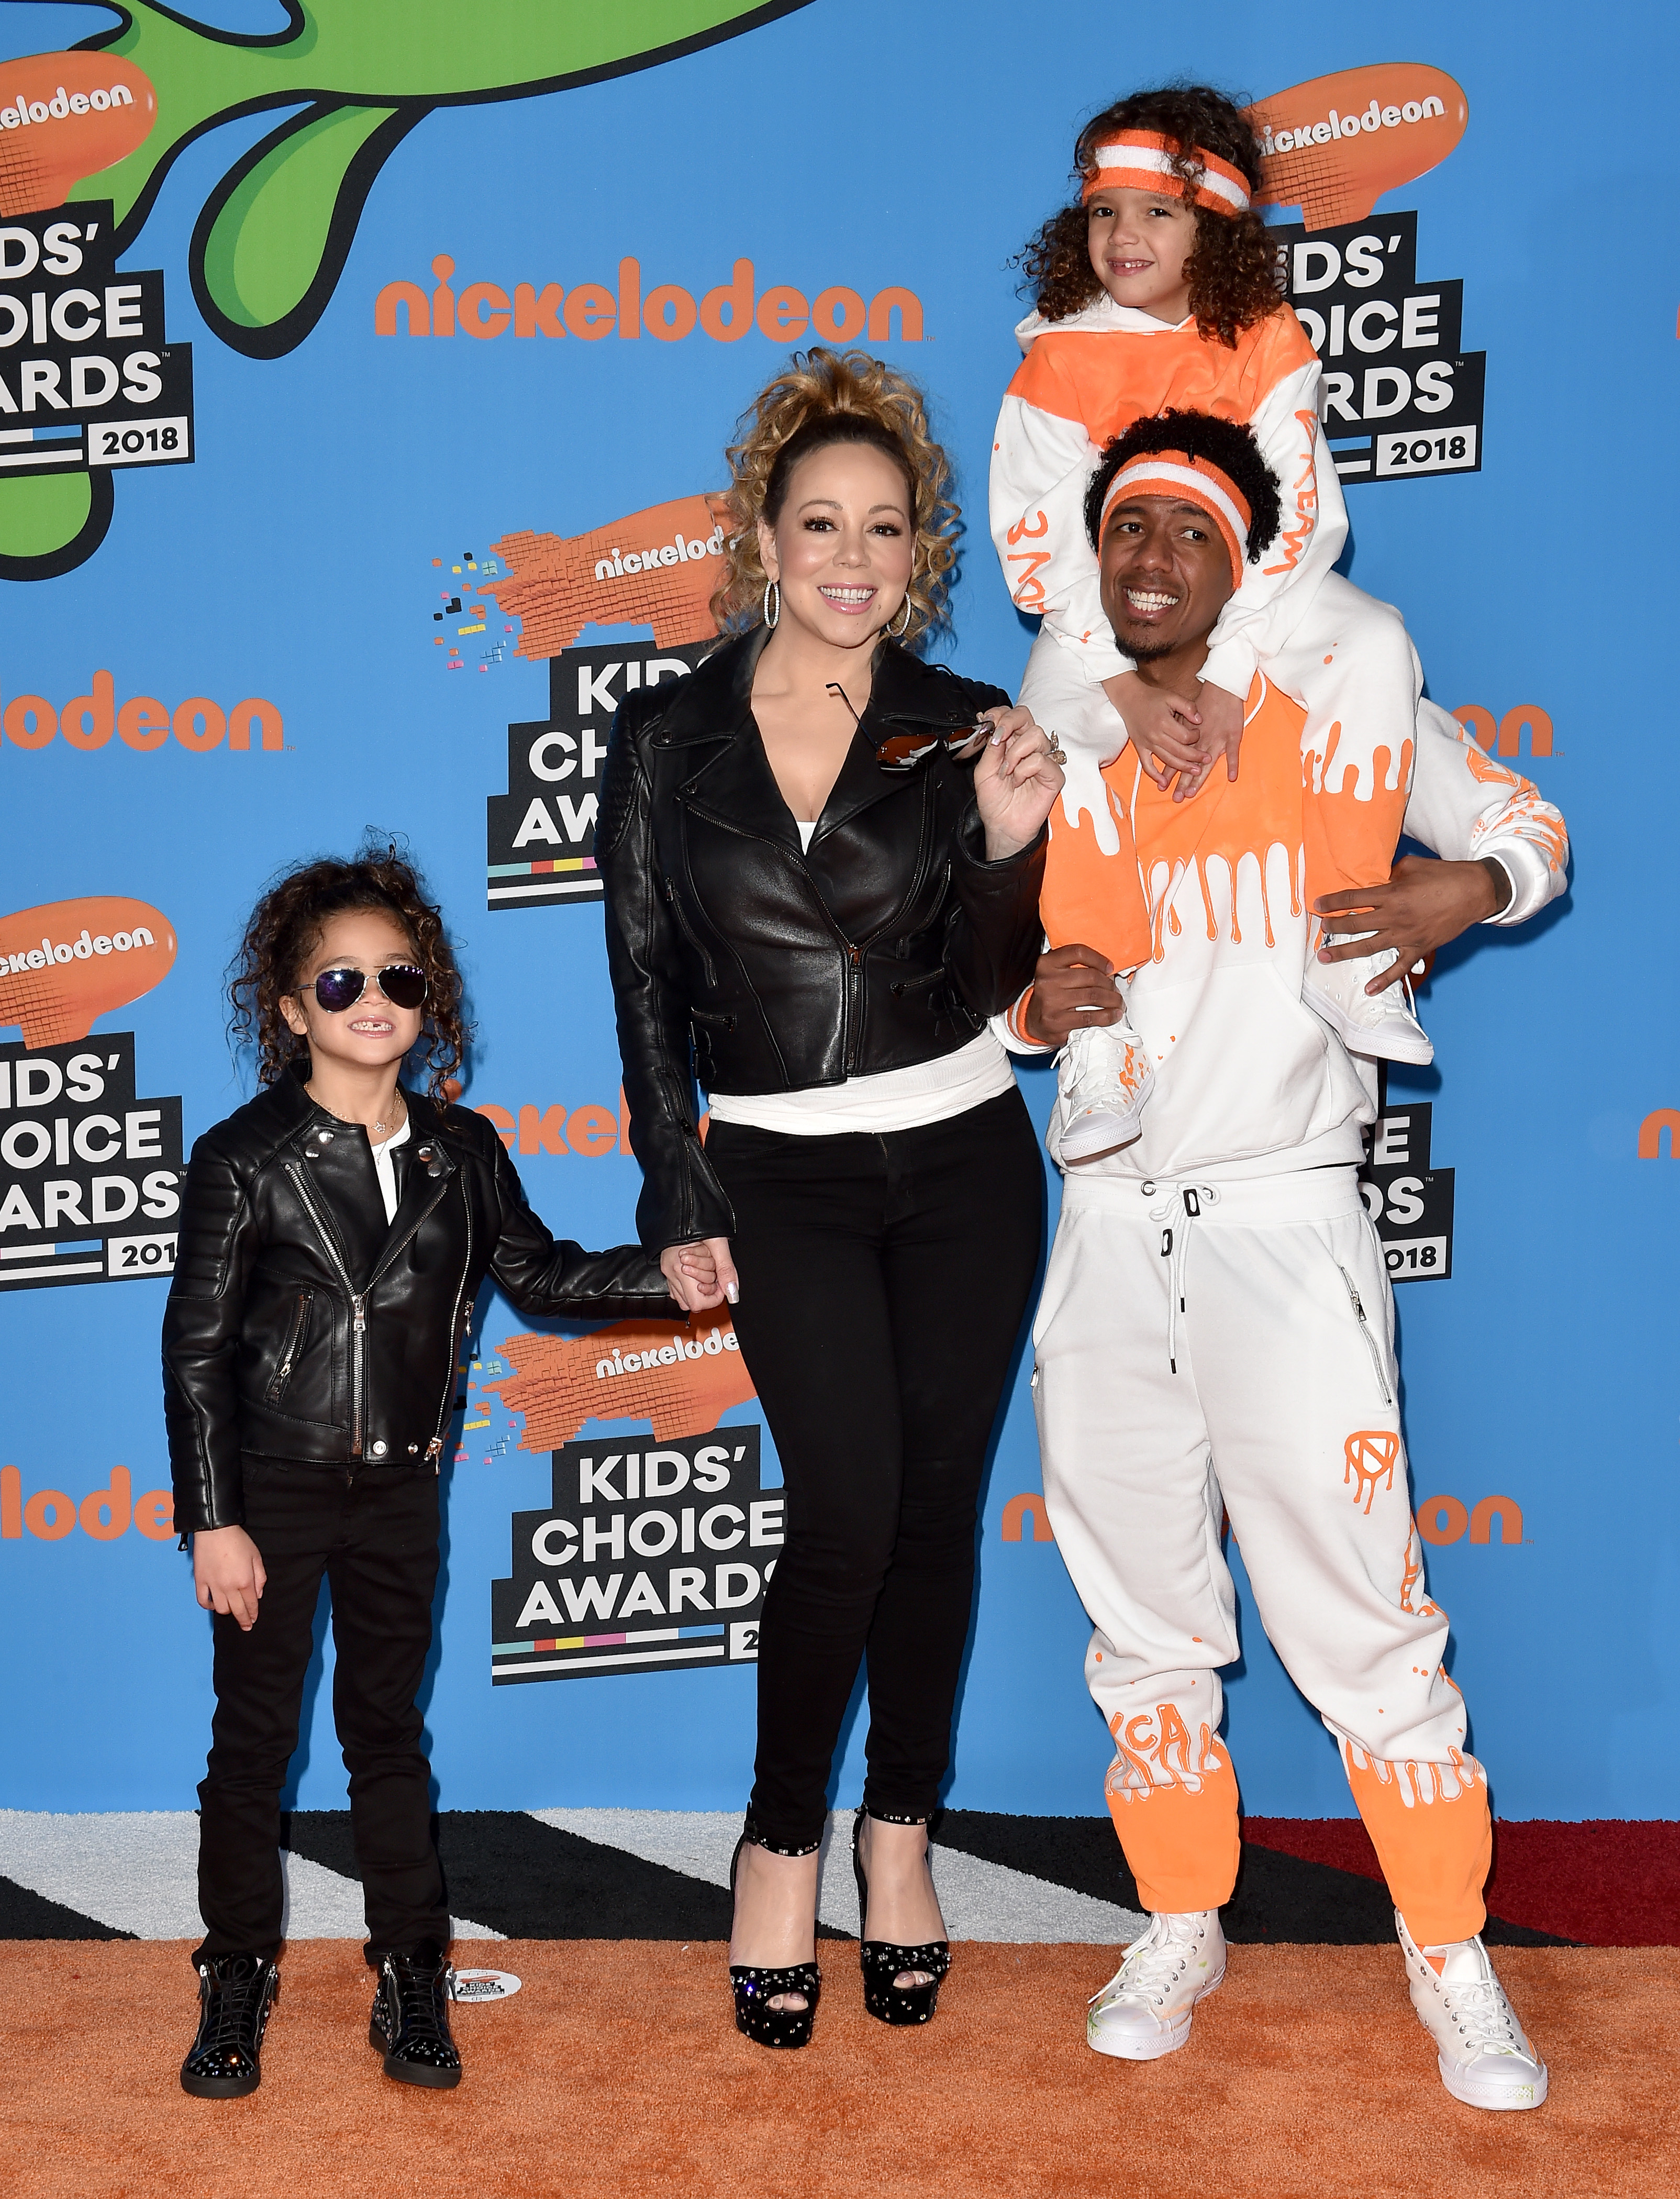 Mariah Carey and Nick Cannon with their kids